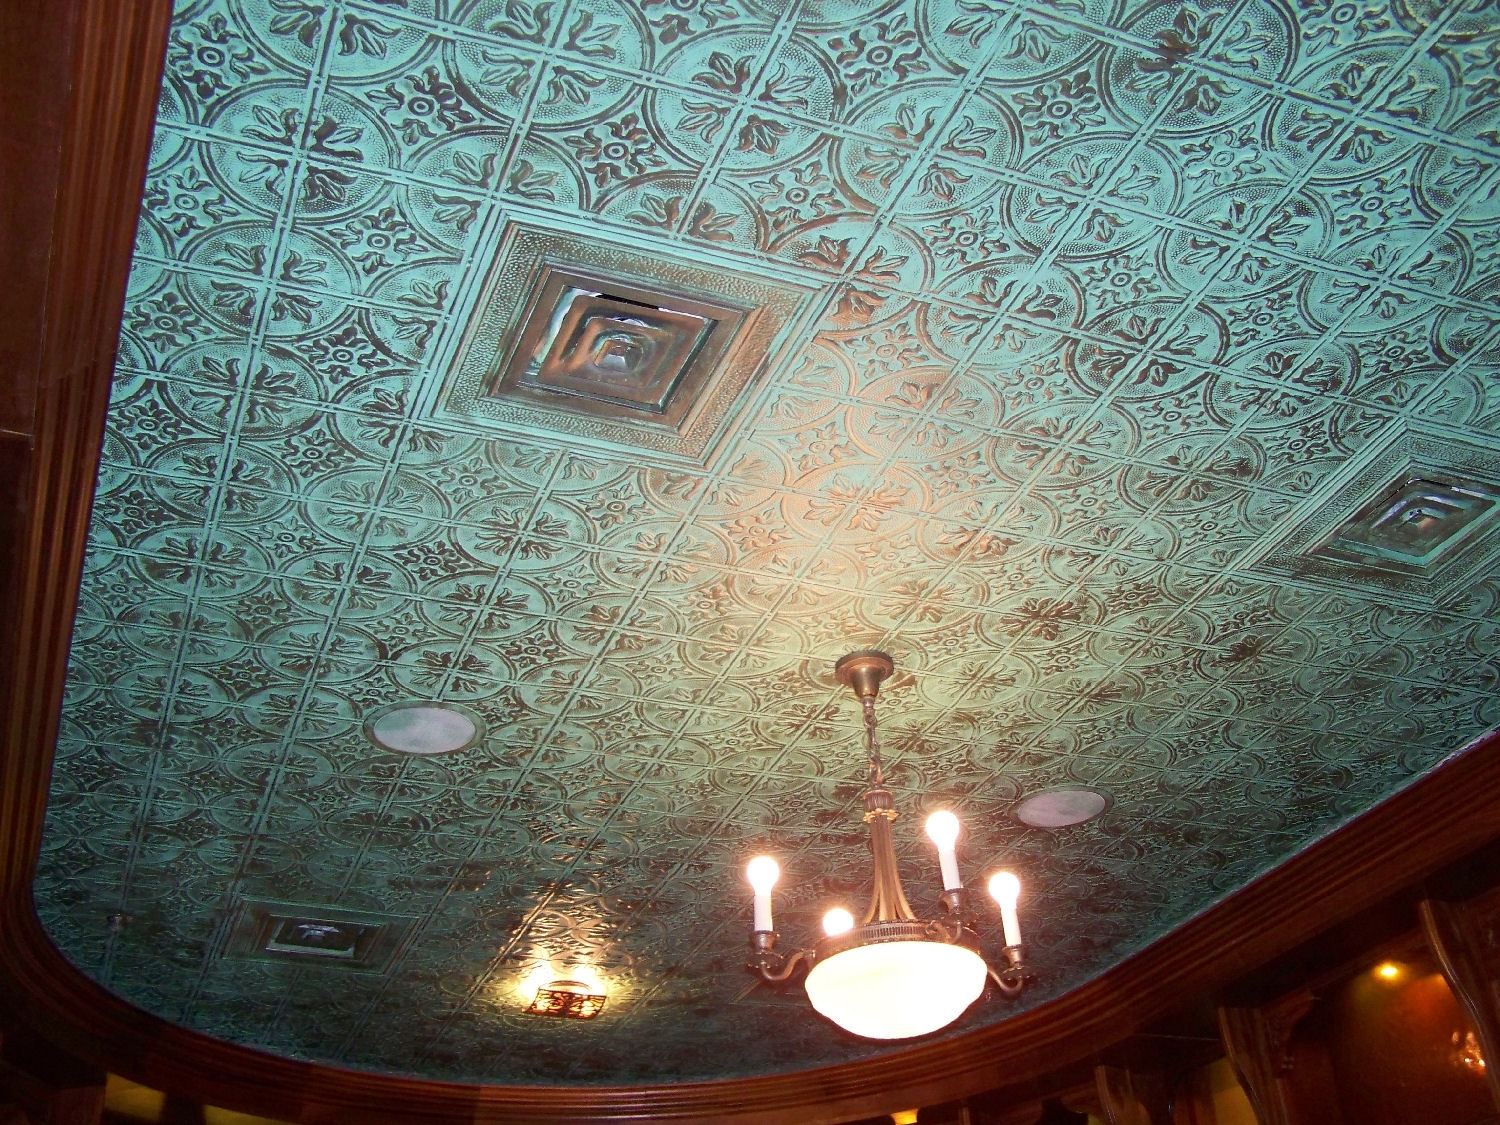 Ceiling Tile Tin Fauxeasy install tin ceiling tiles save money